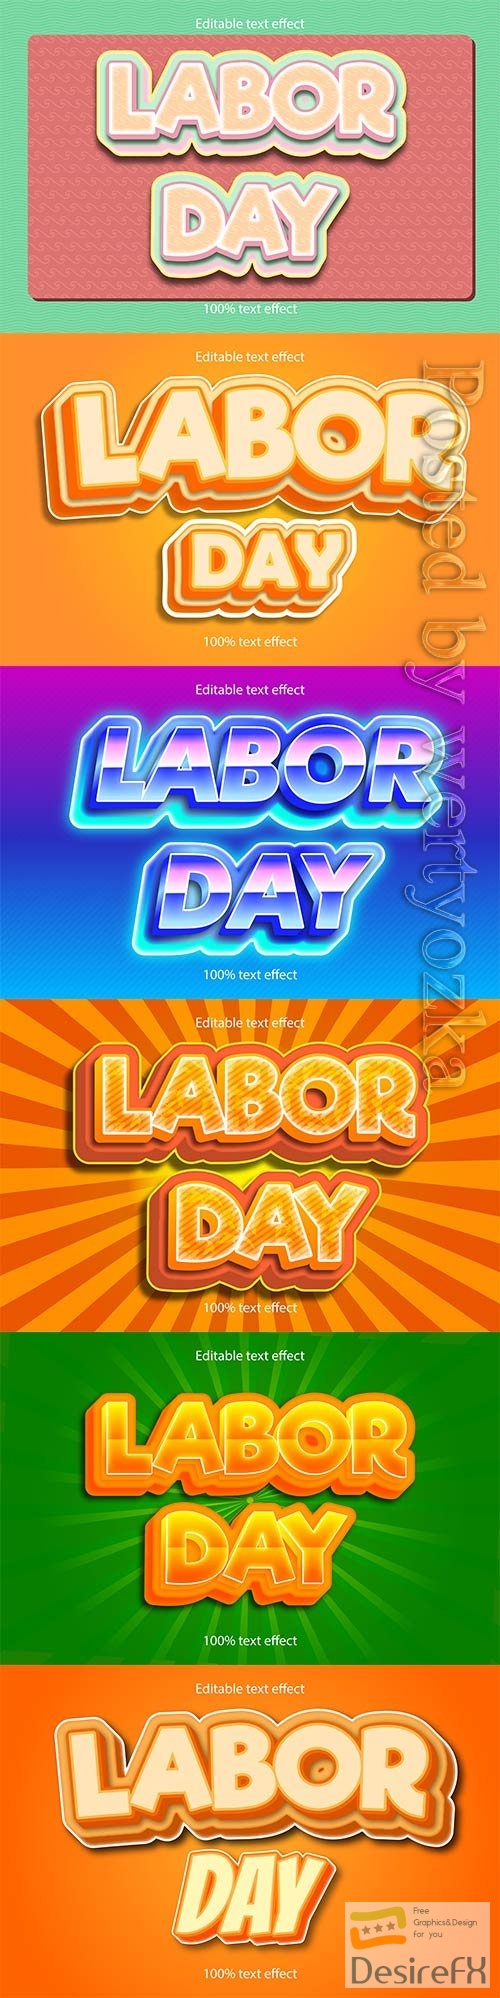 Labor day editable text effect vol 6